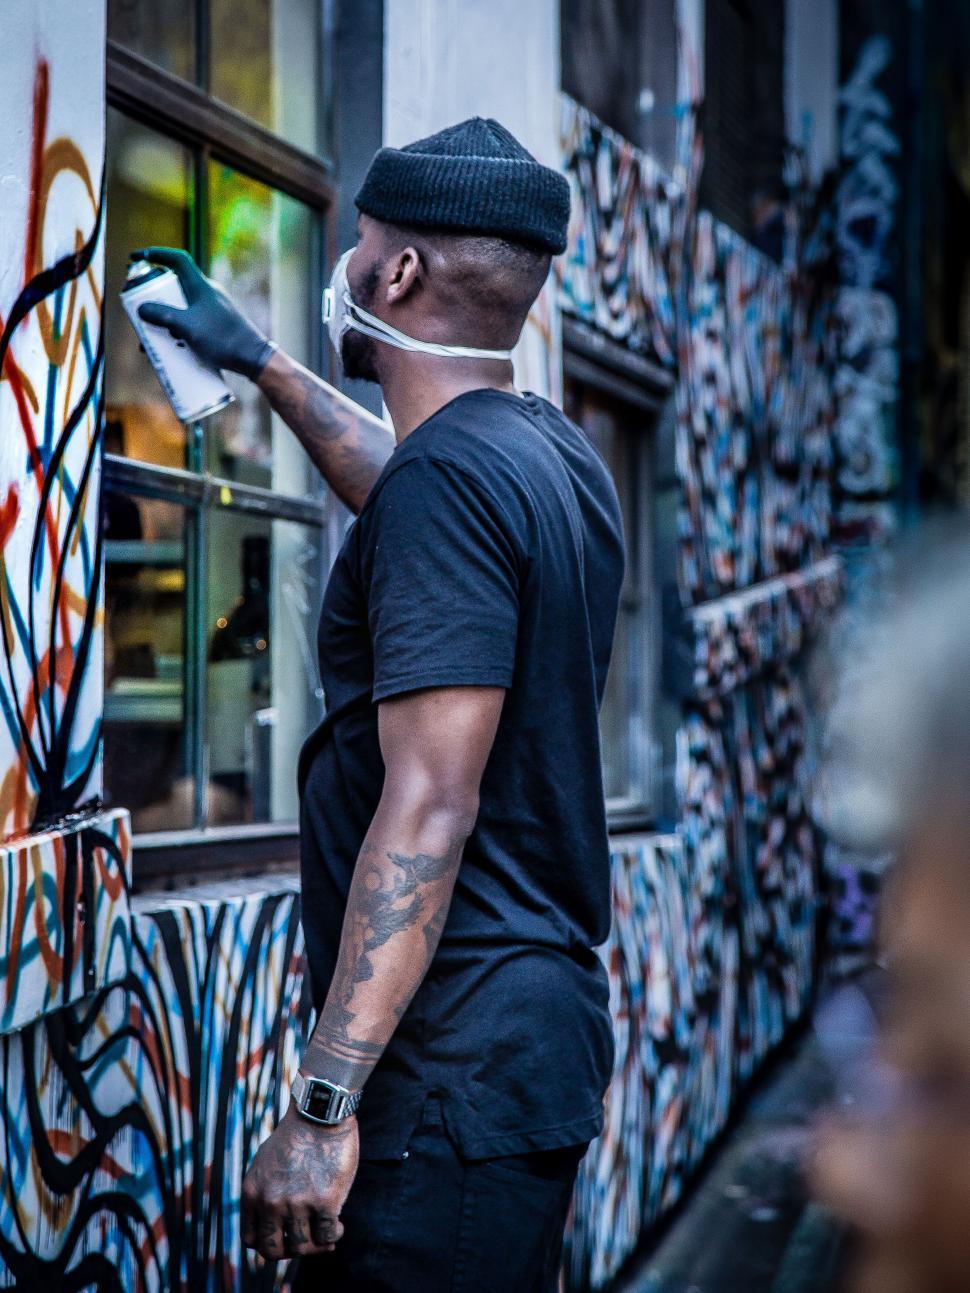 Free Image of Urban artist painting a colorful mural 